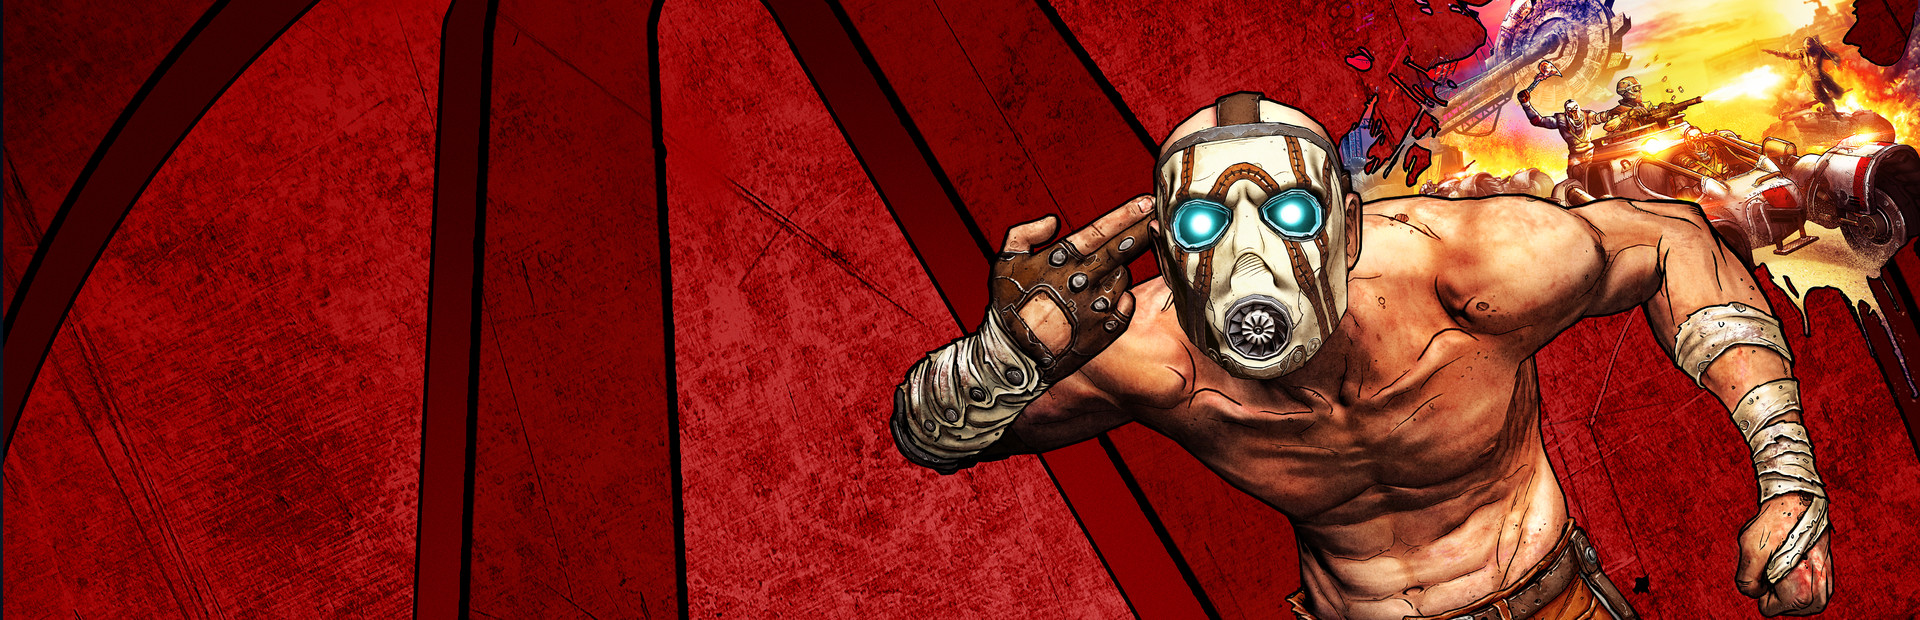 Borderlands Game of the Year cover image